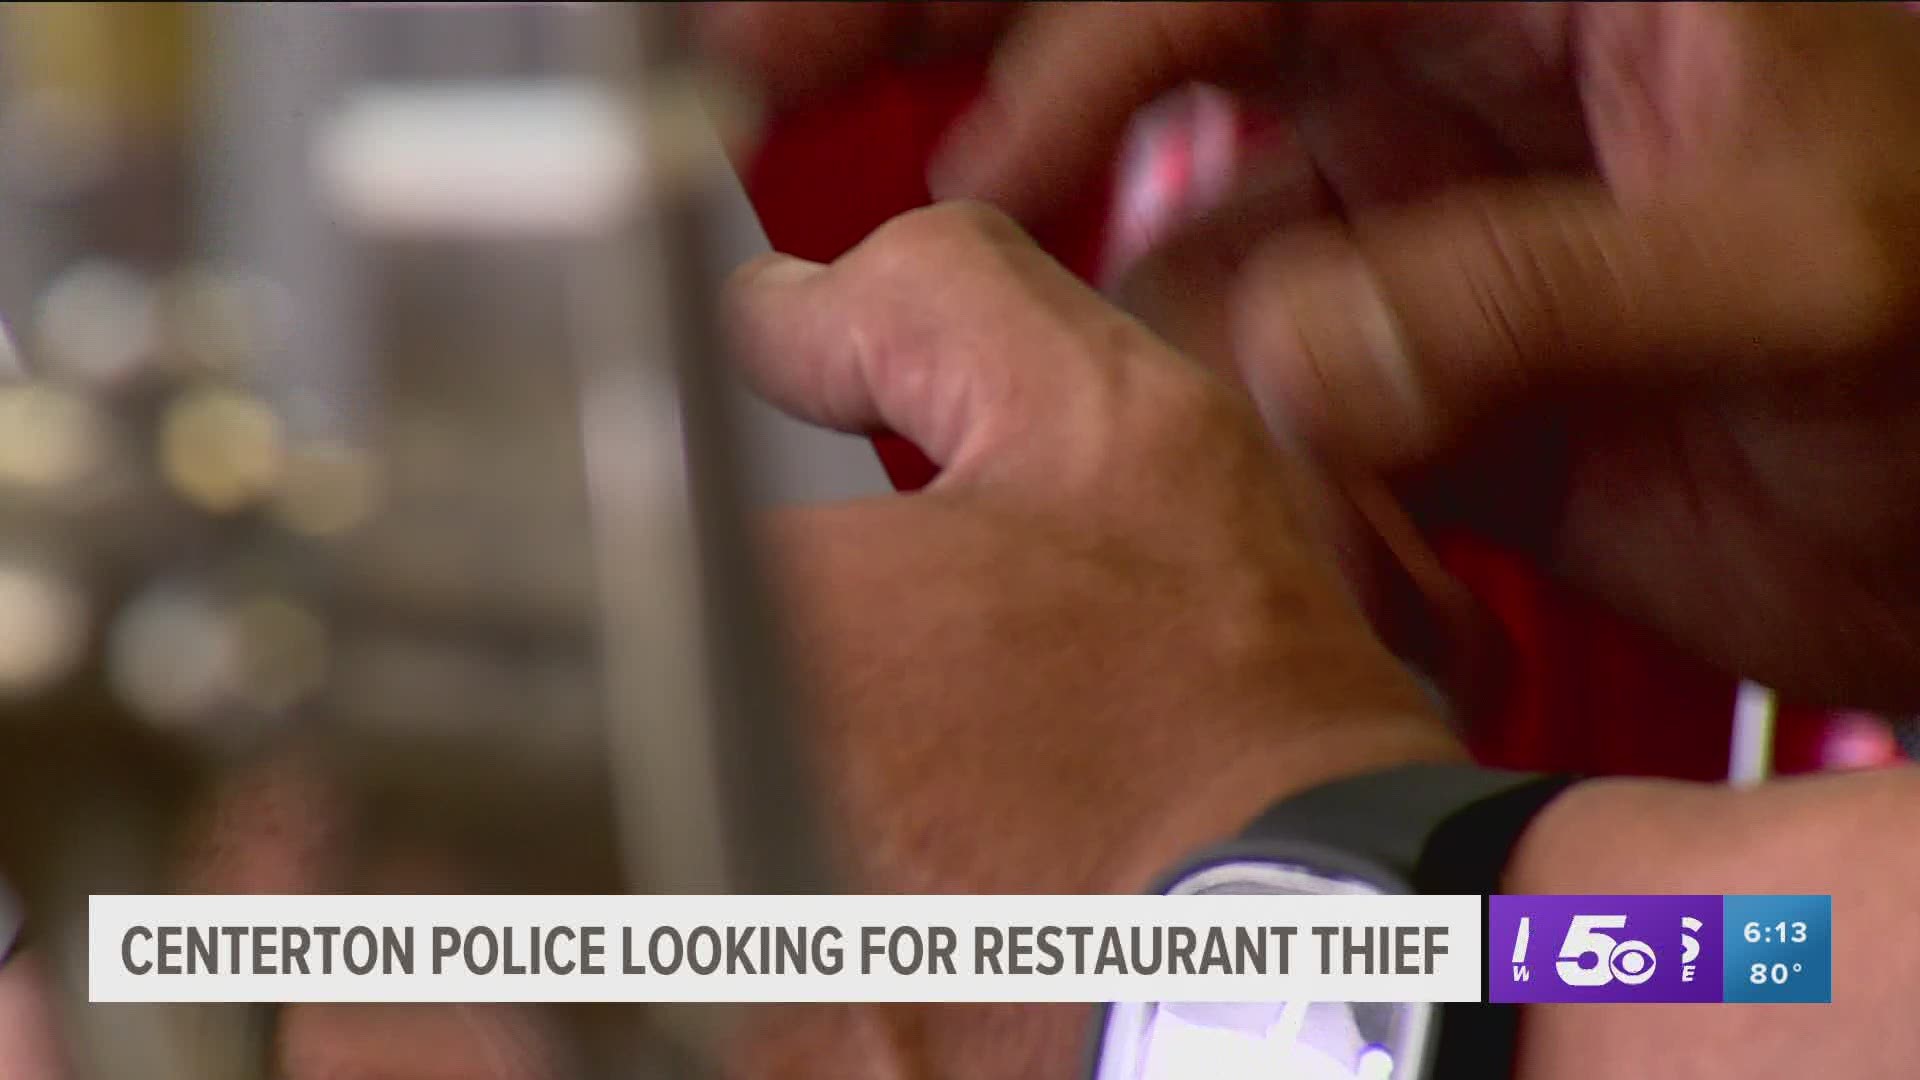 Centerton Police looking for restaurant thief